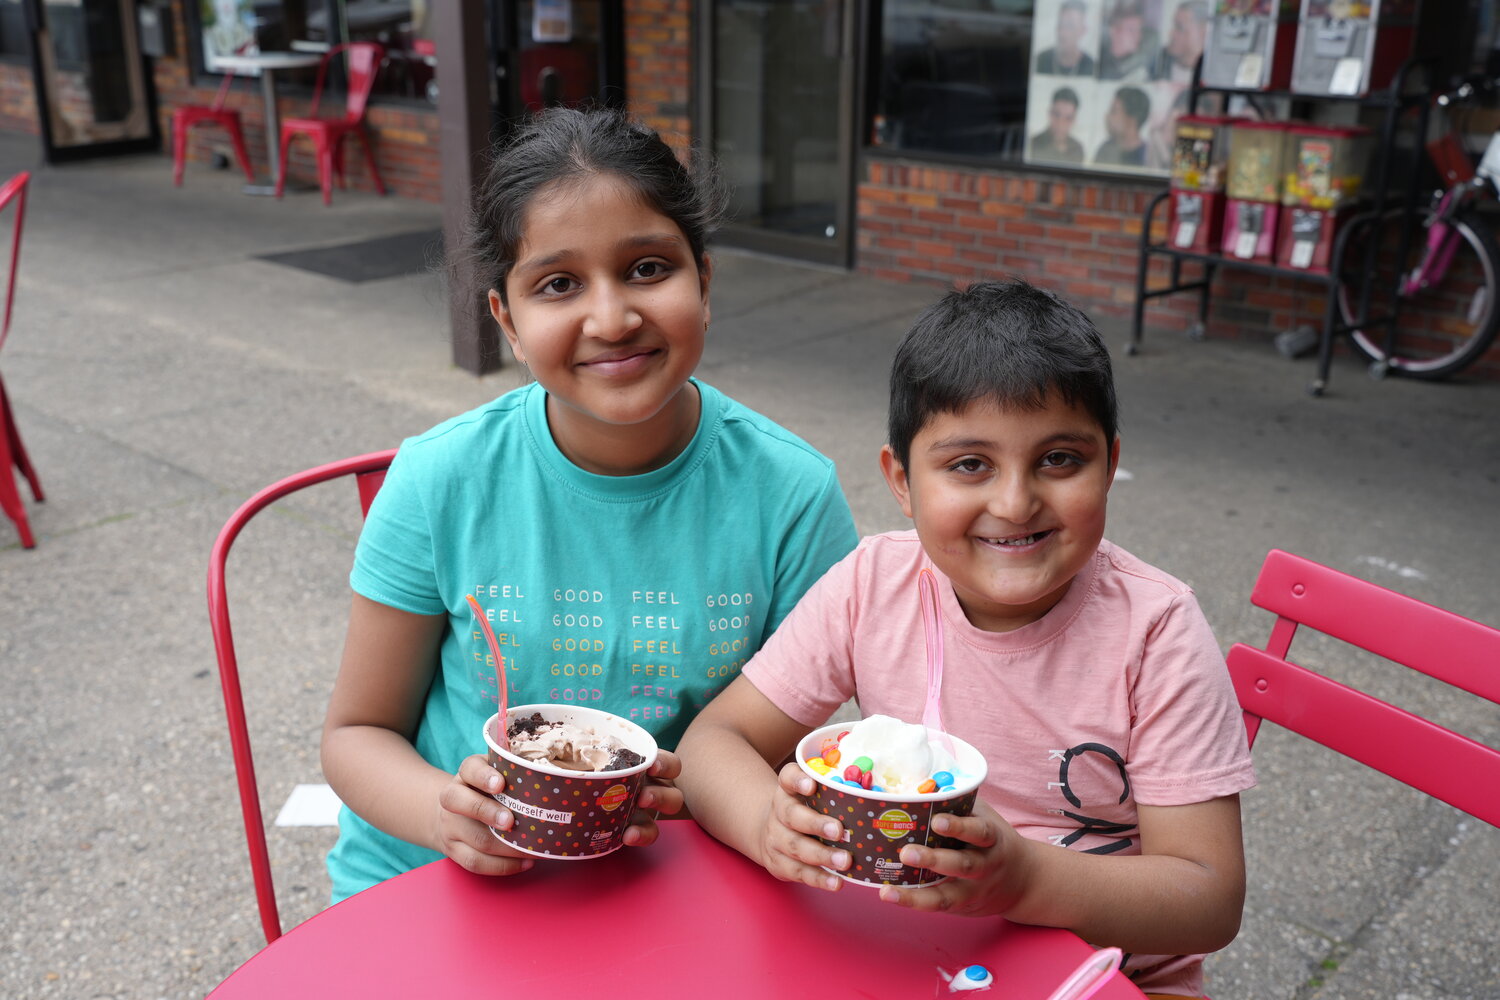 10-year-old Cataria Kaur, left, and Jasnoor Singh, 6,  from Franklin Square filled their Red Mango frozen yogurt with their favorite toppings.